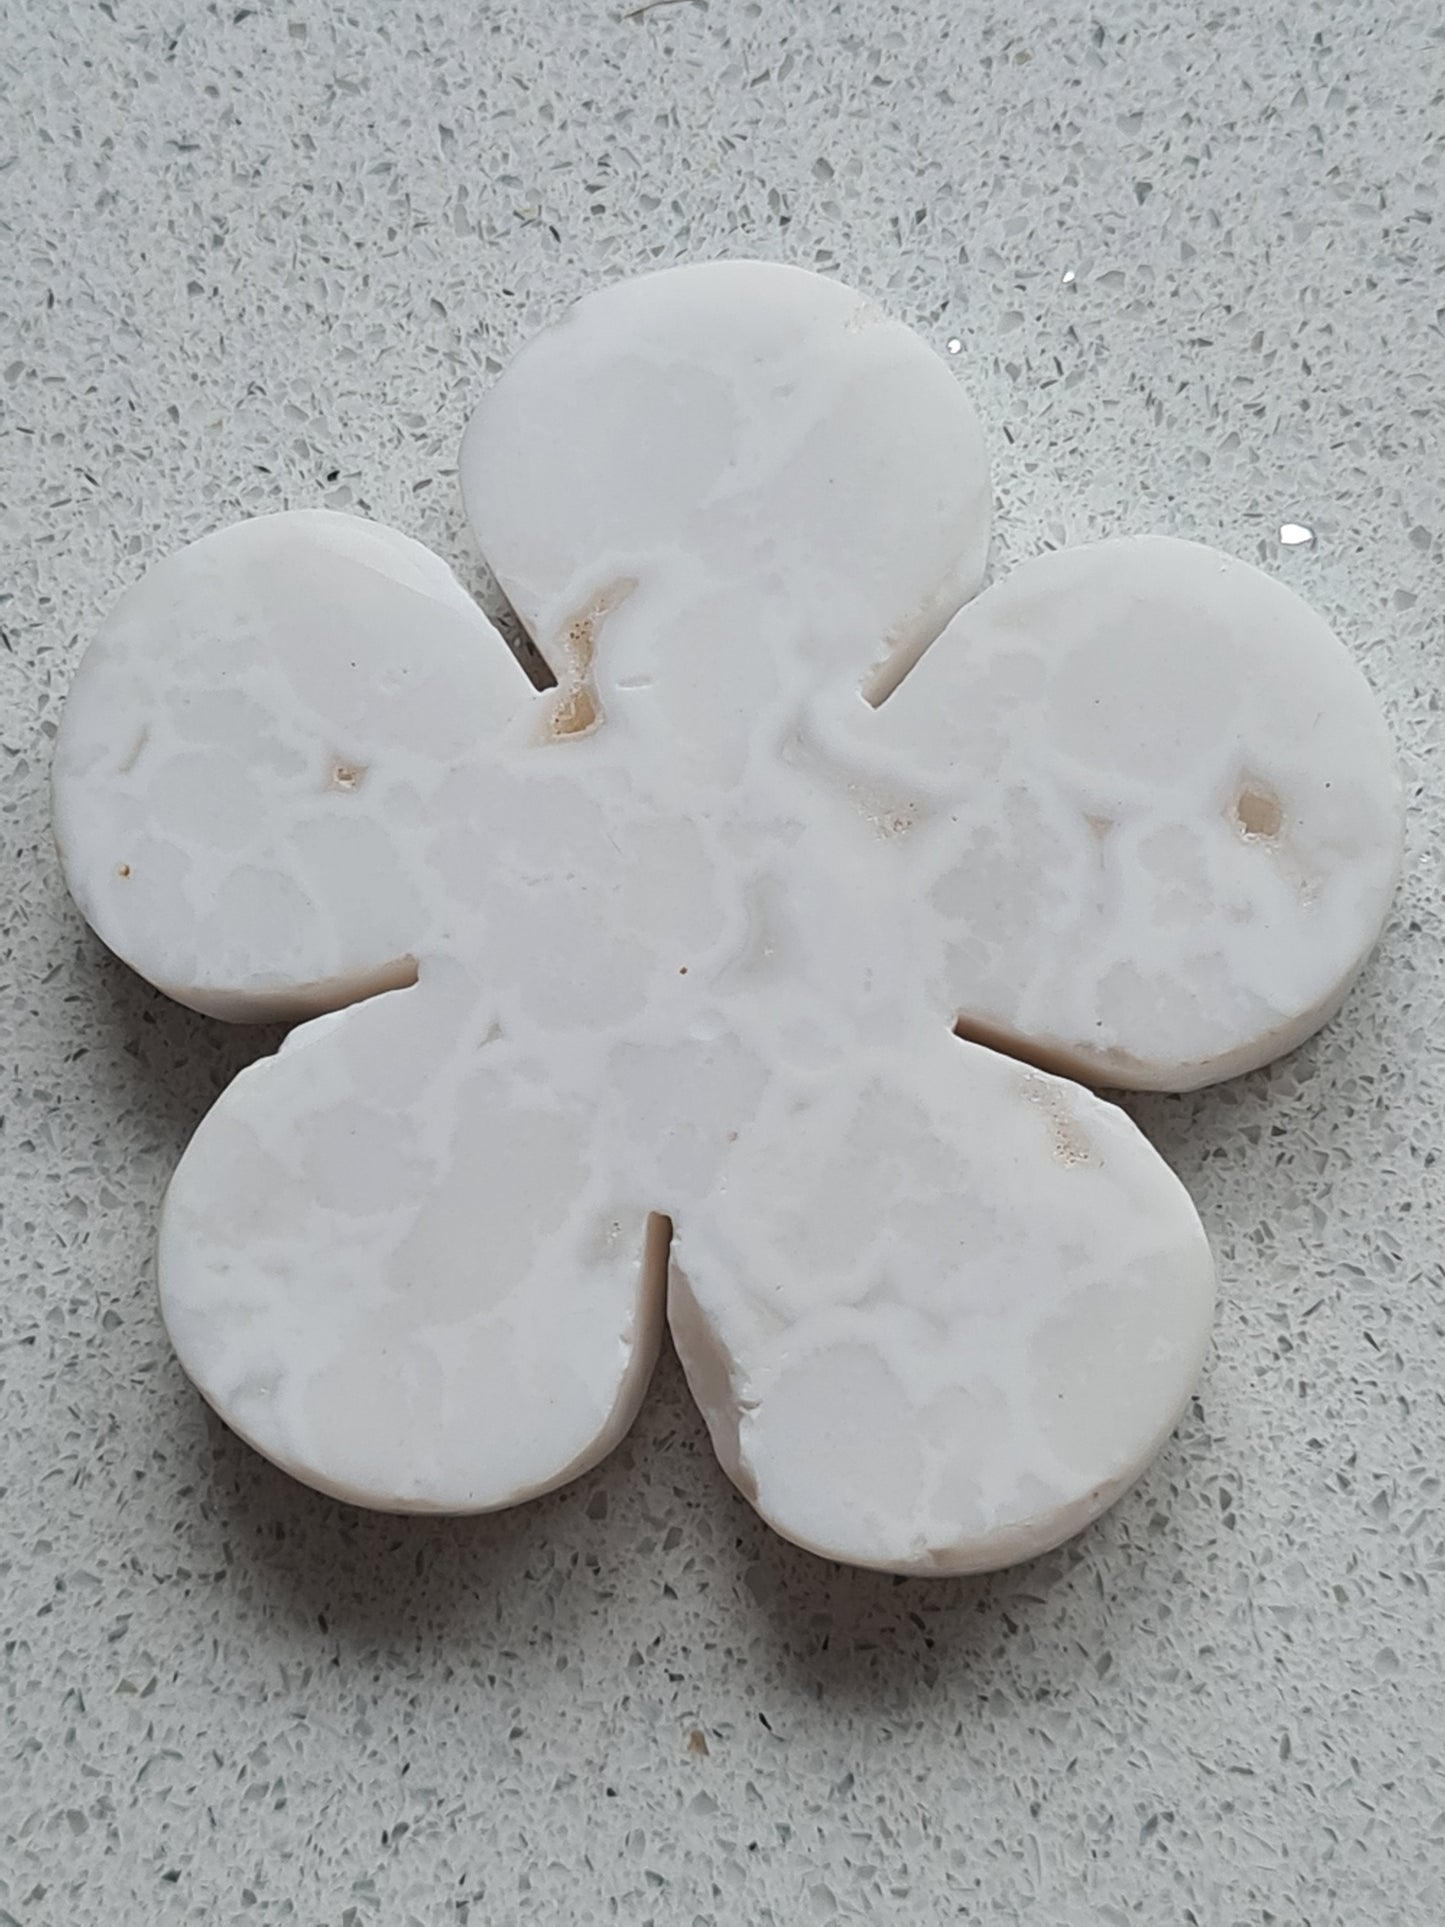 Snow White Agate Flower Carving